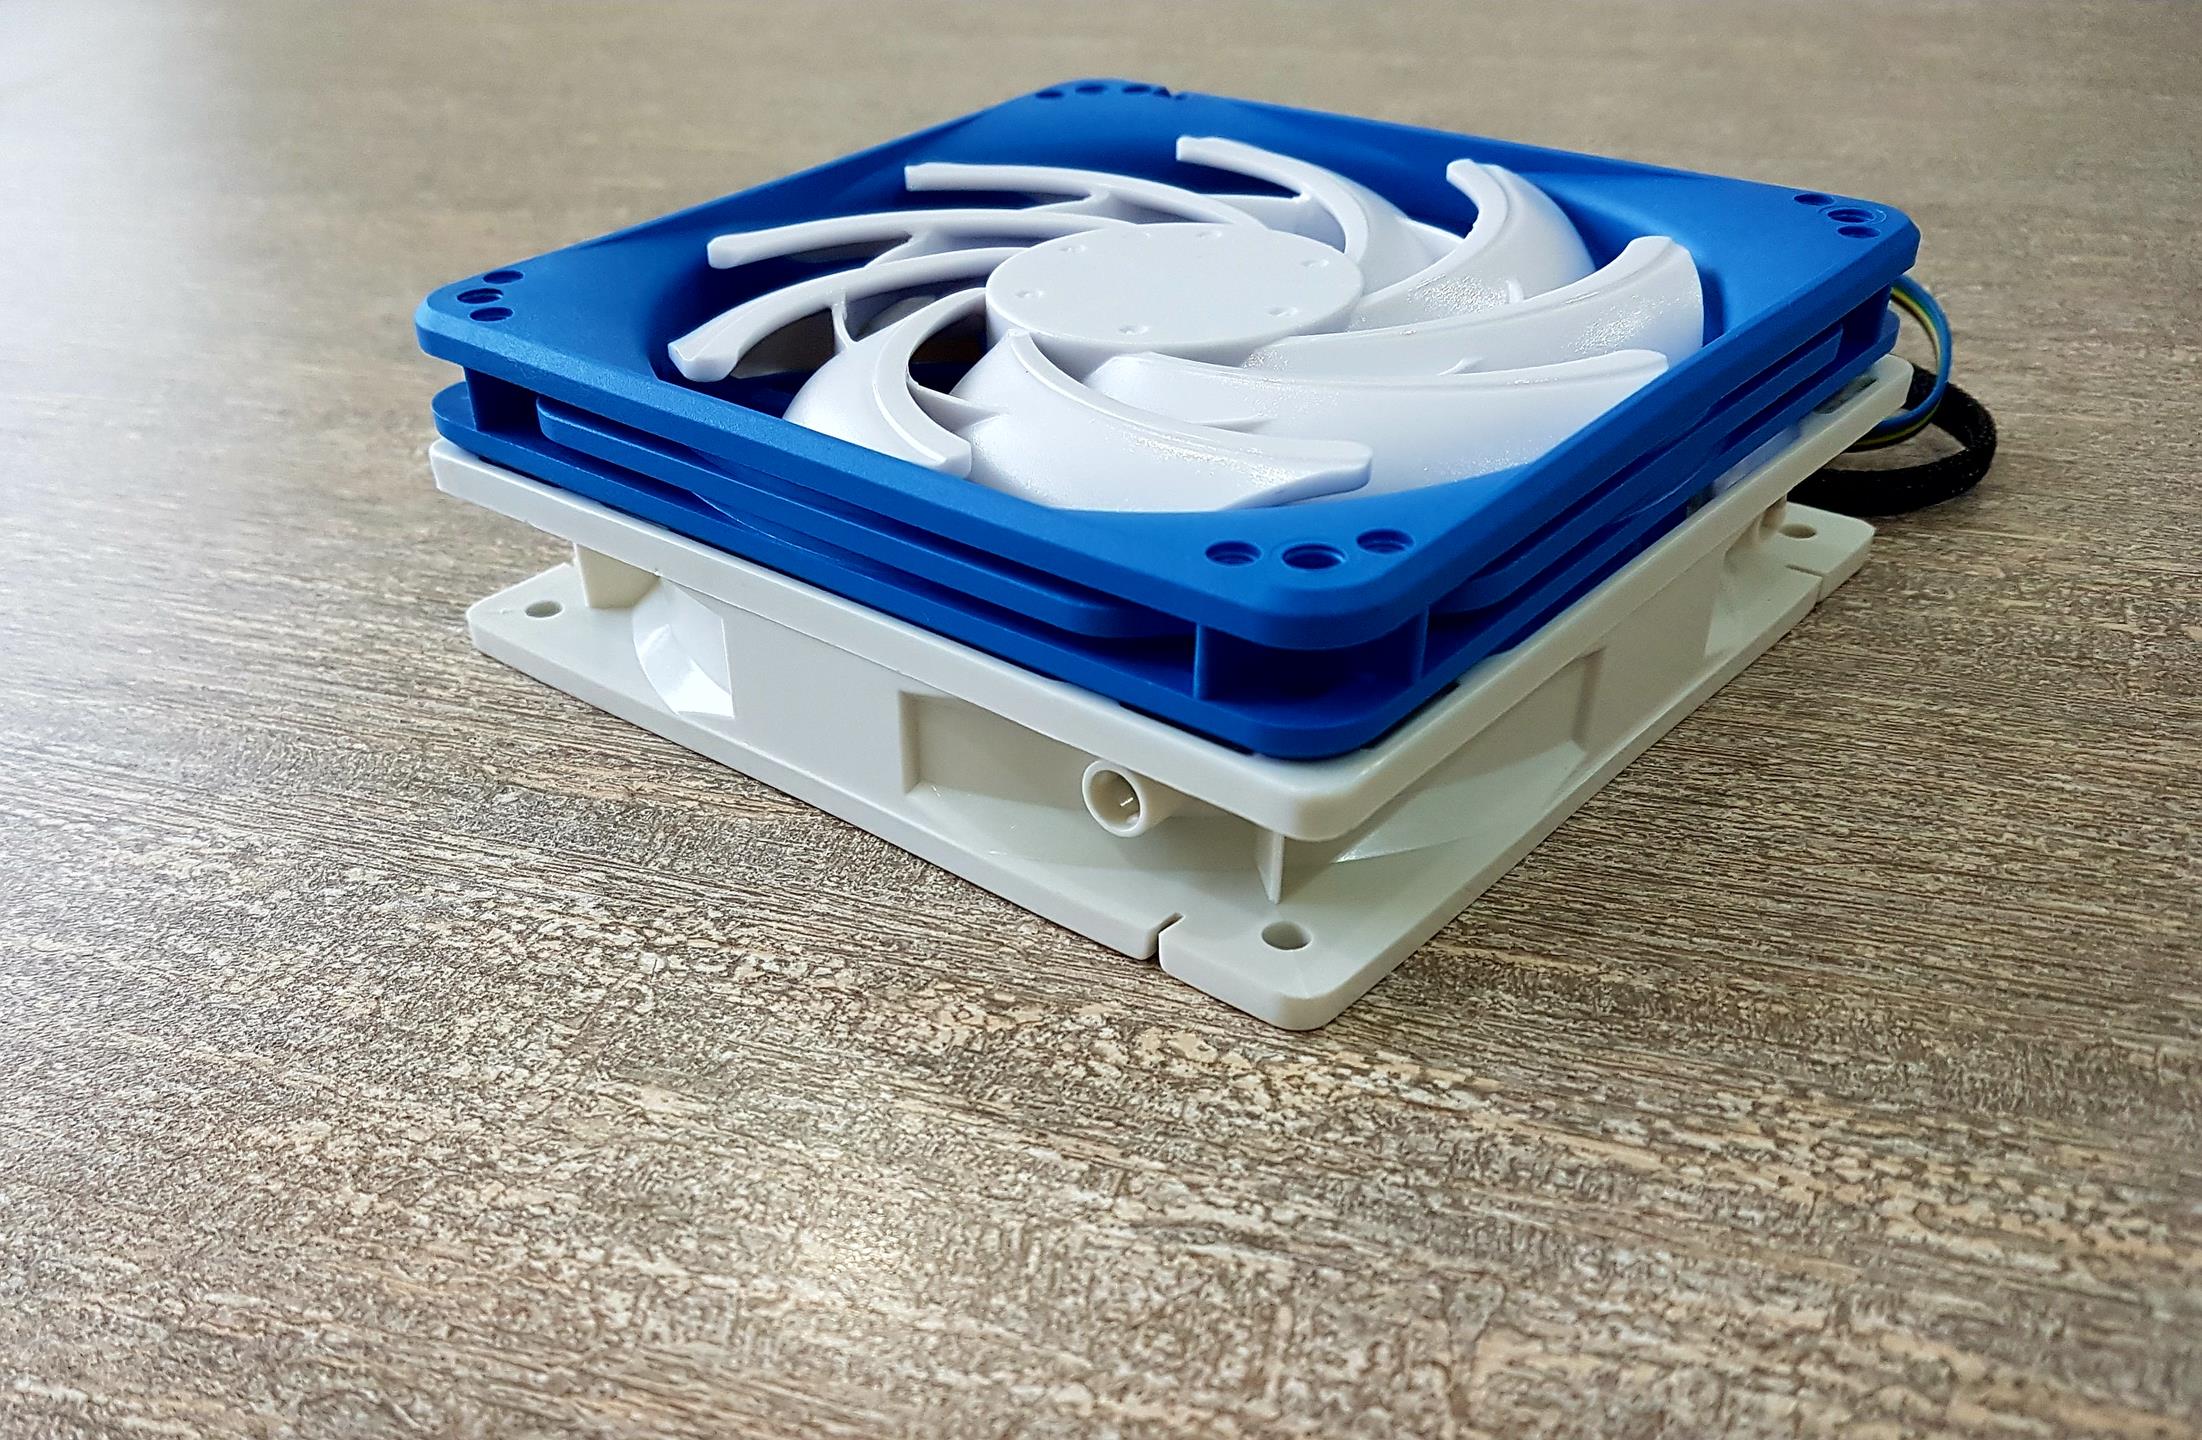 SilverStone SST-FW121 Professional Slim Edition 120mm Fans Review